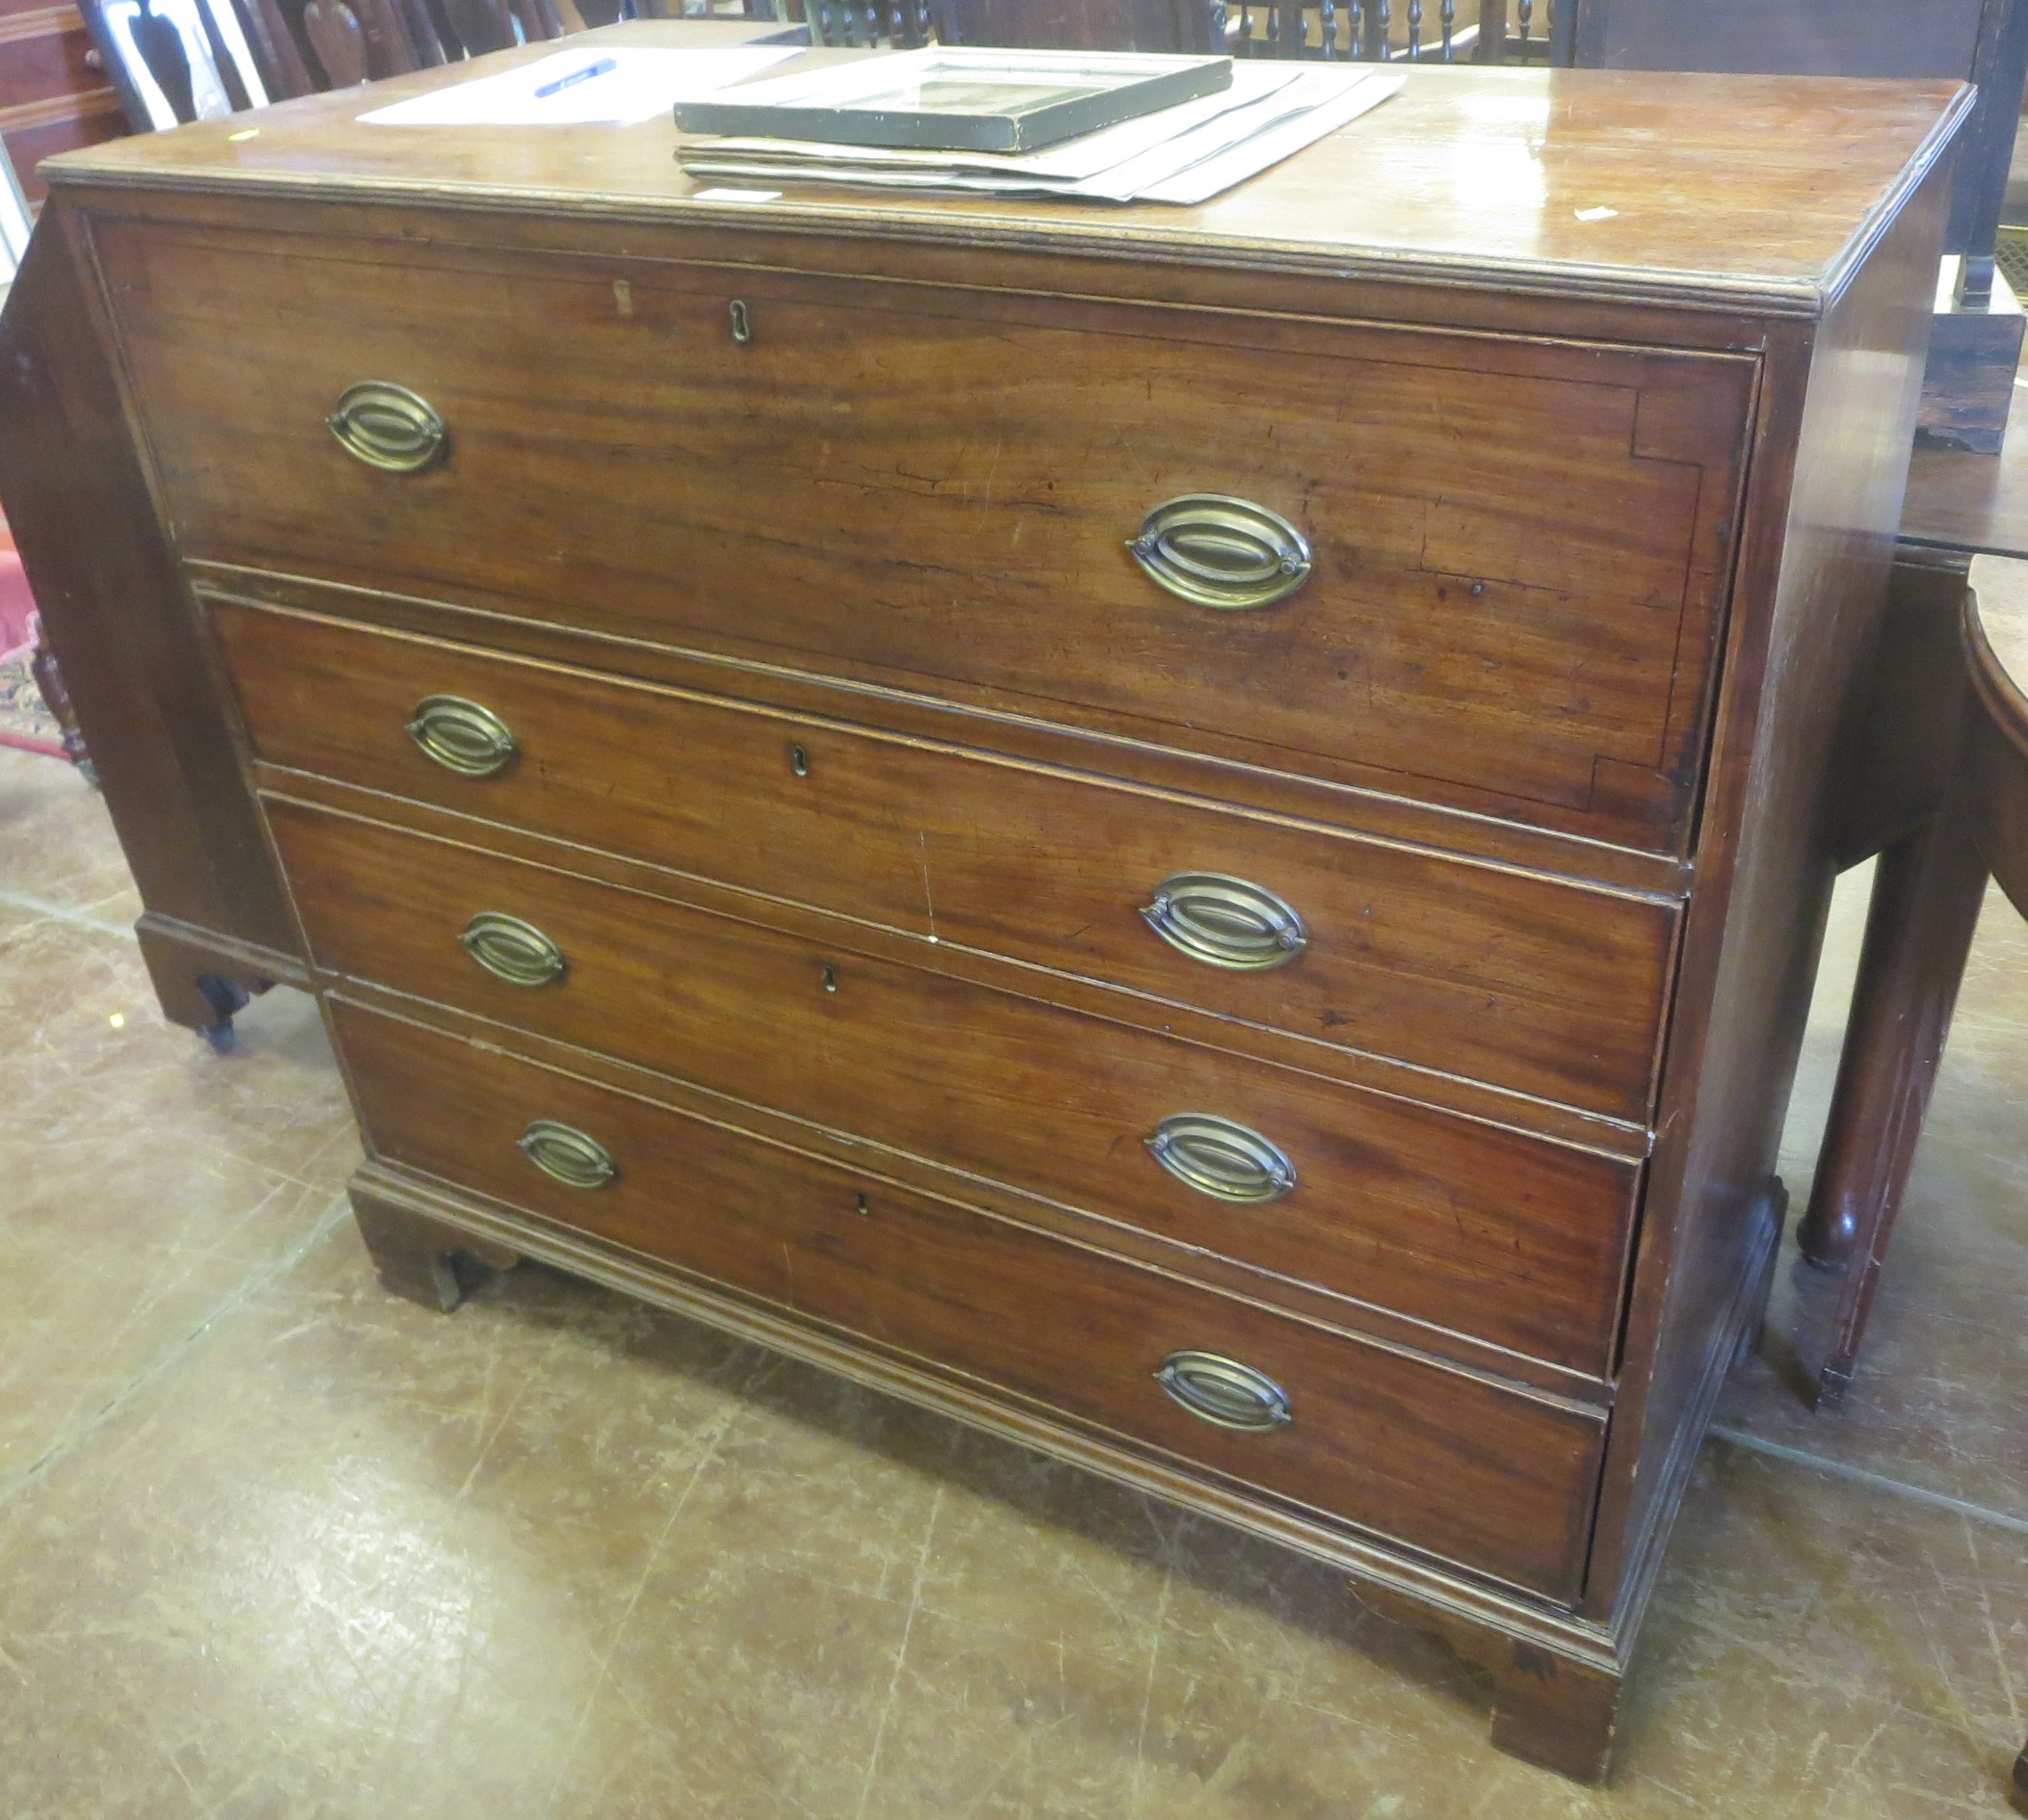 A 19th Century mahogany Secretaire Chest with fitted interior of drawers and compartments above